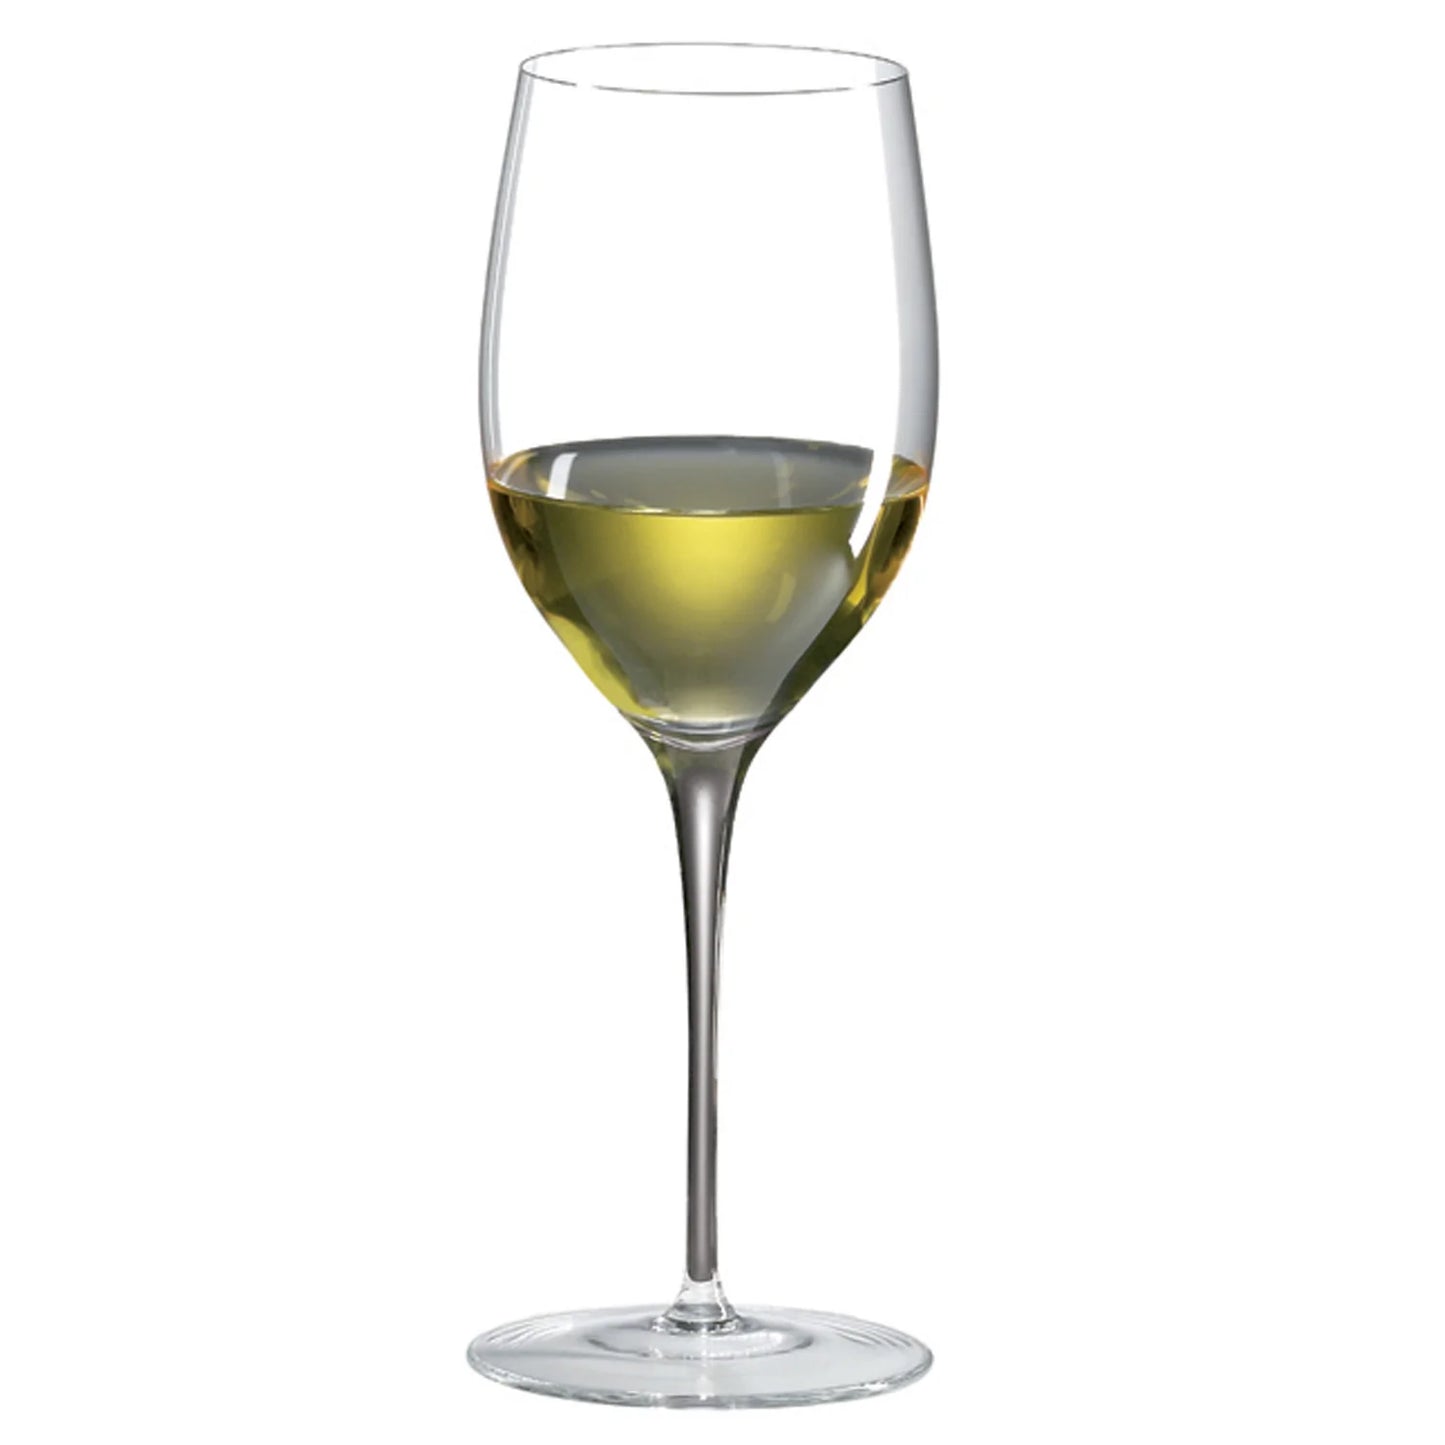 Ravenscroft Invisibles Chardonnay Grand Cru Glass (Set of 4) with Free Microfiber Cleaning Cloth IN-24